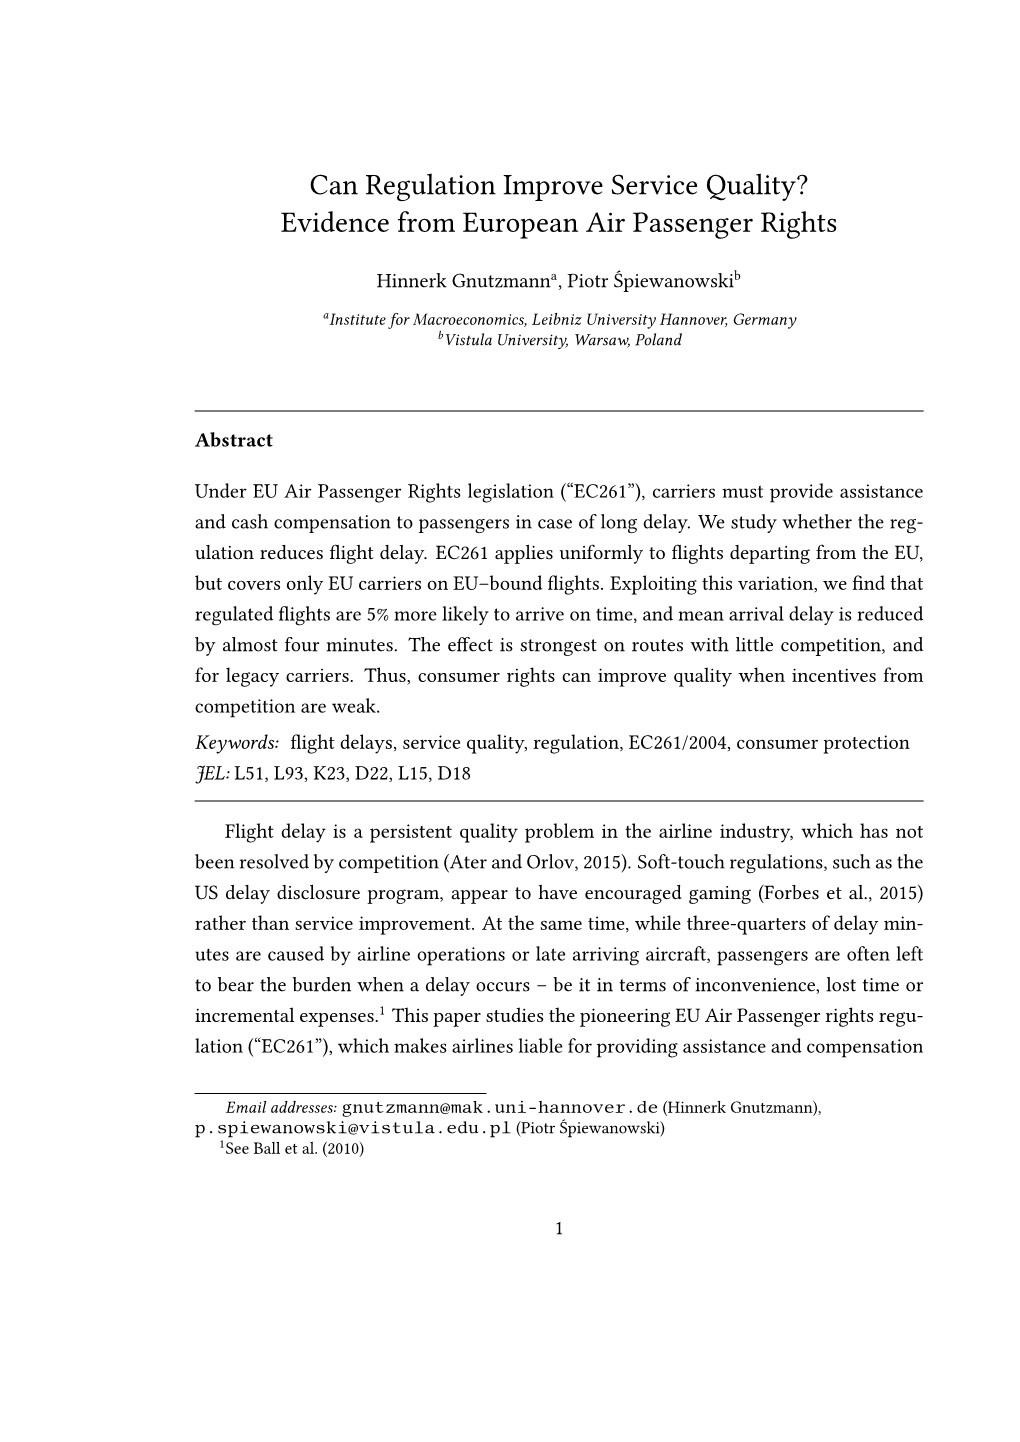 Evidence from European Air Passenger Rights